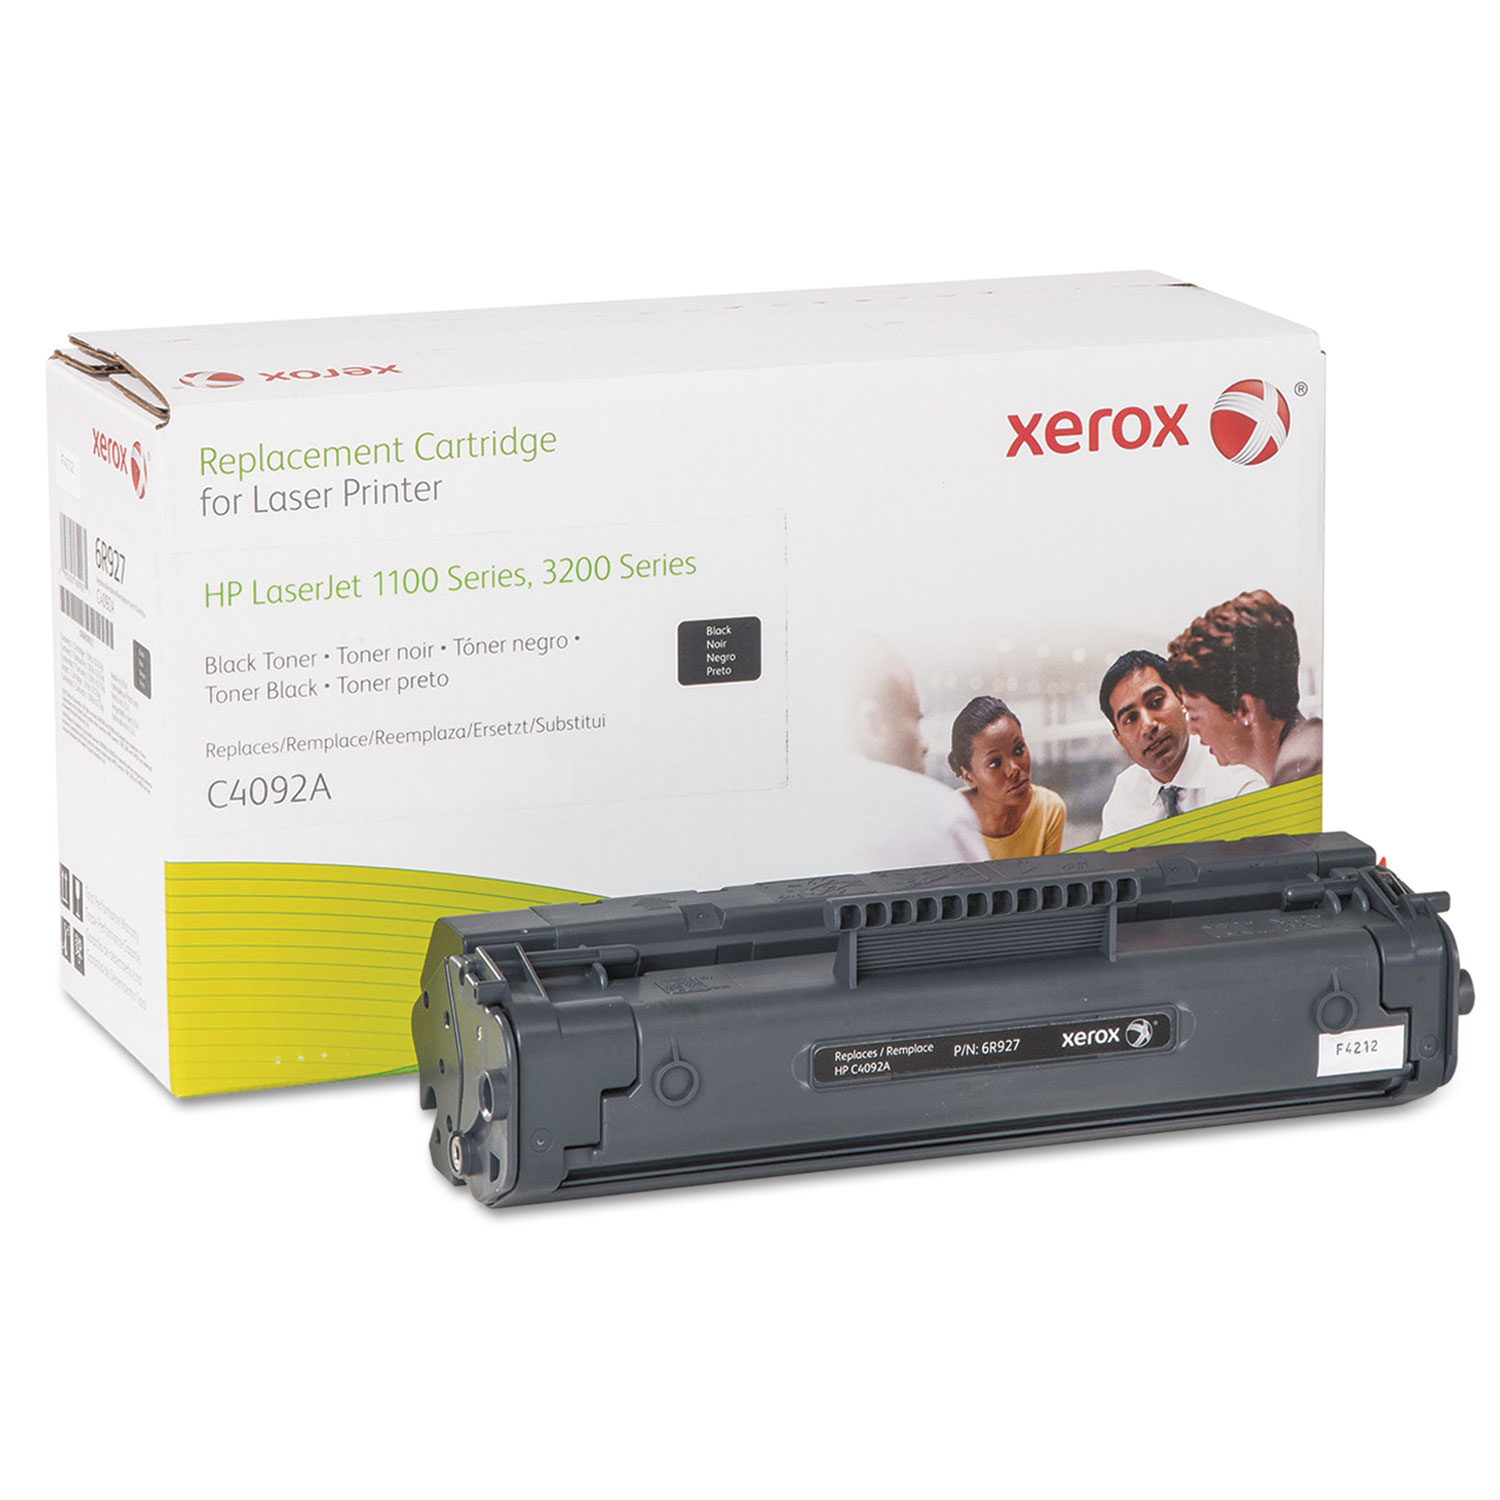  Xerox 006R00927 006R00927 Replacement Toner for C4092A (92A), Black (XER006R00927) 